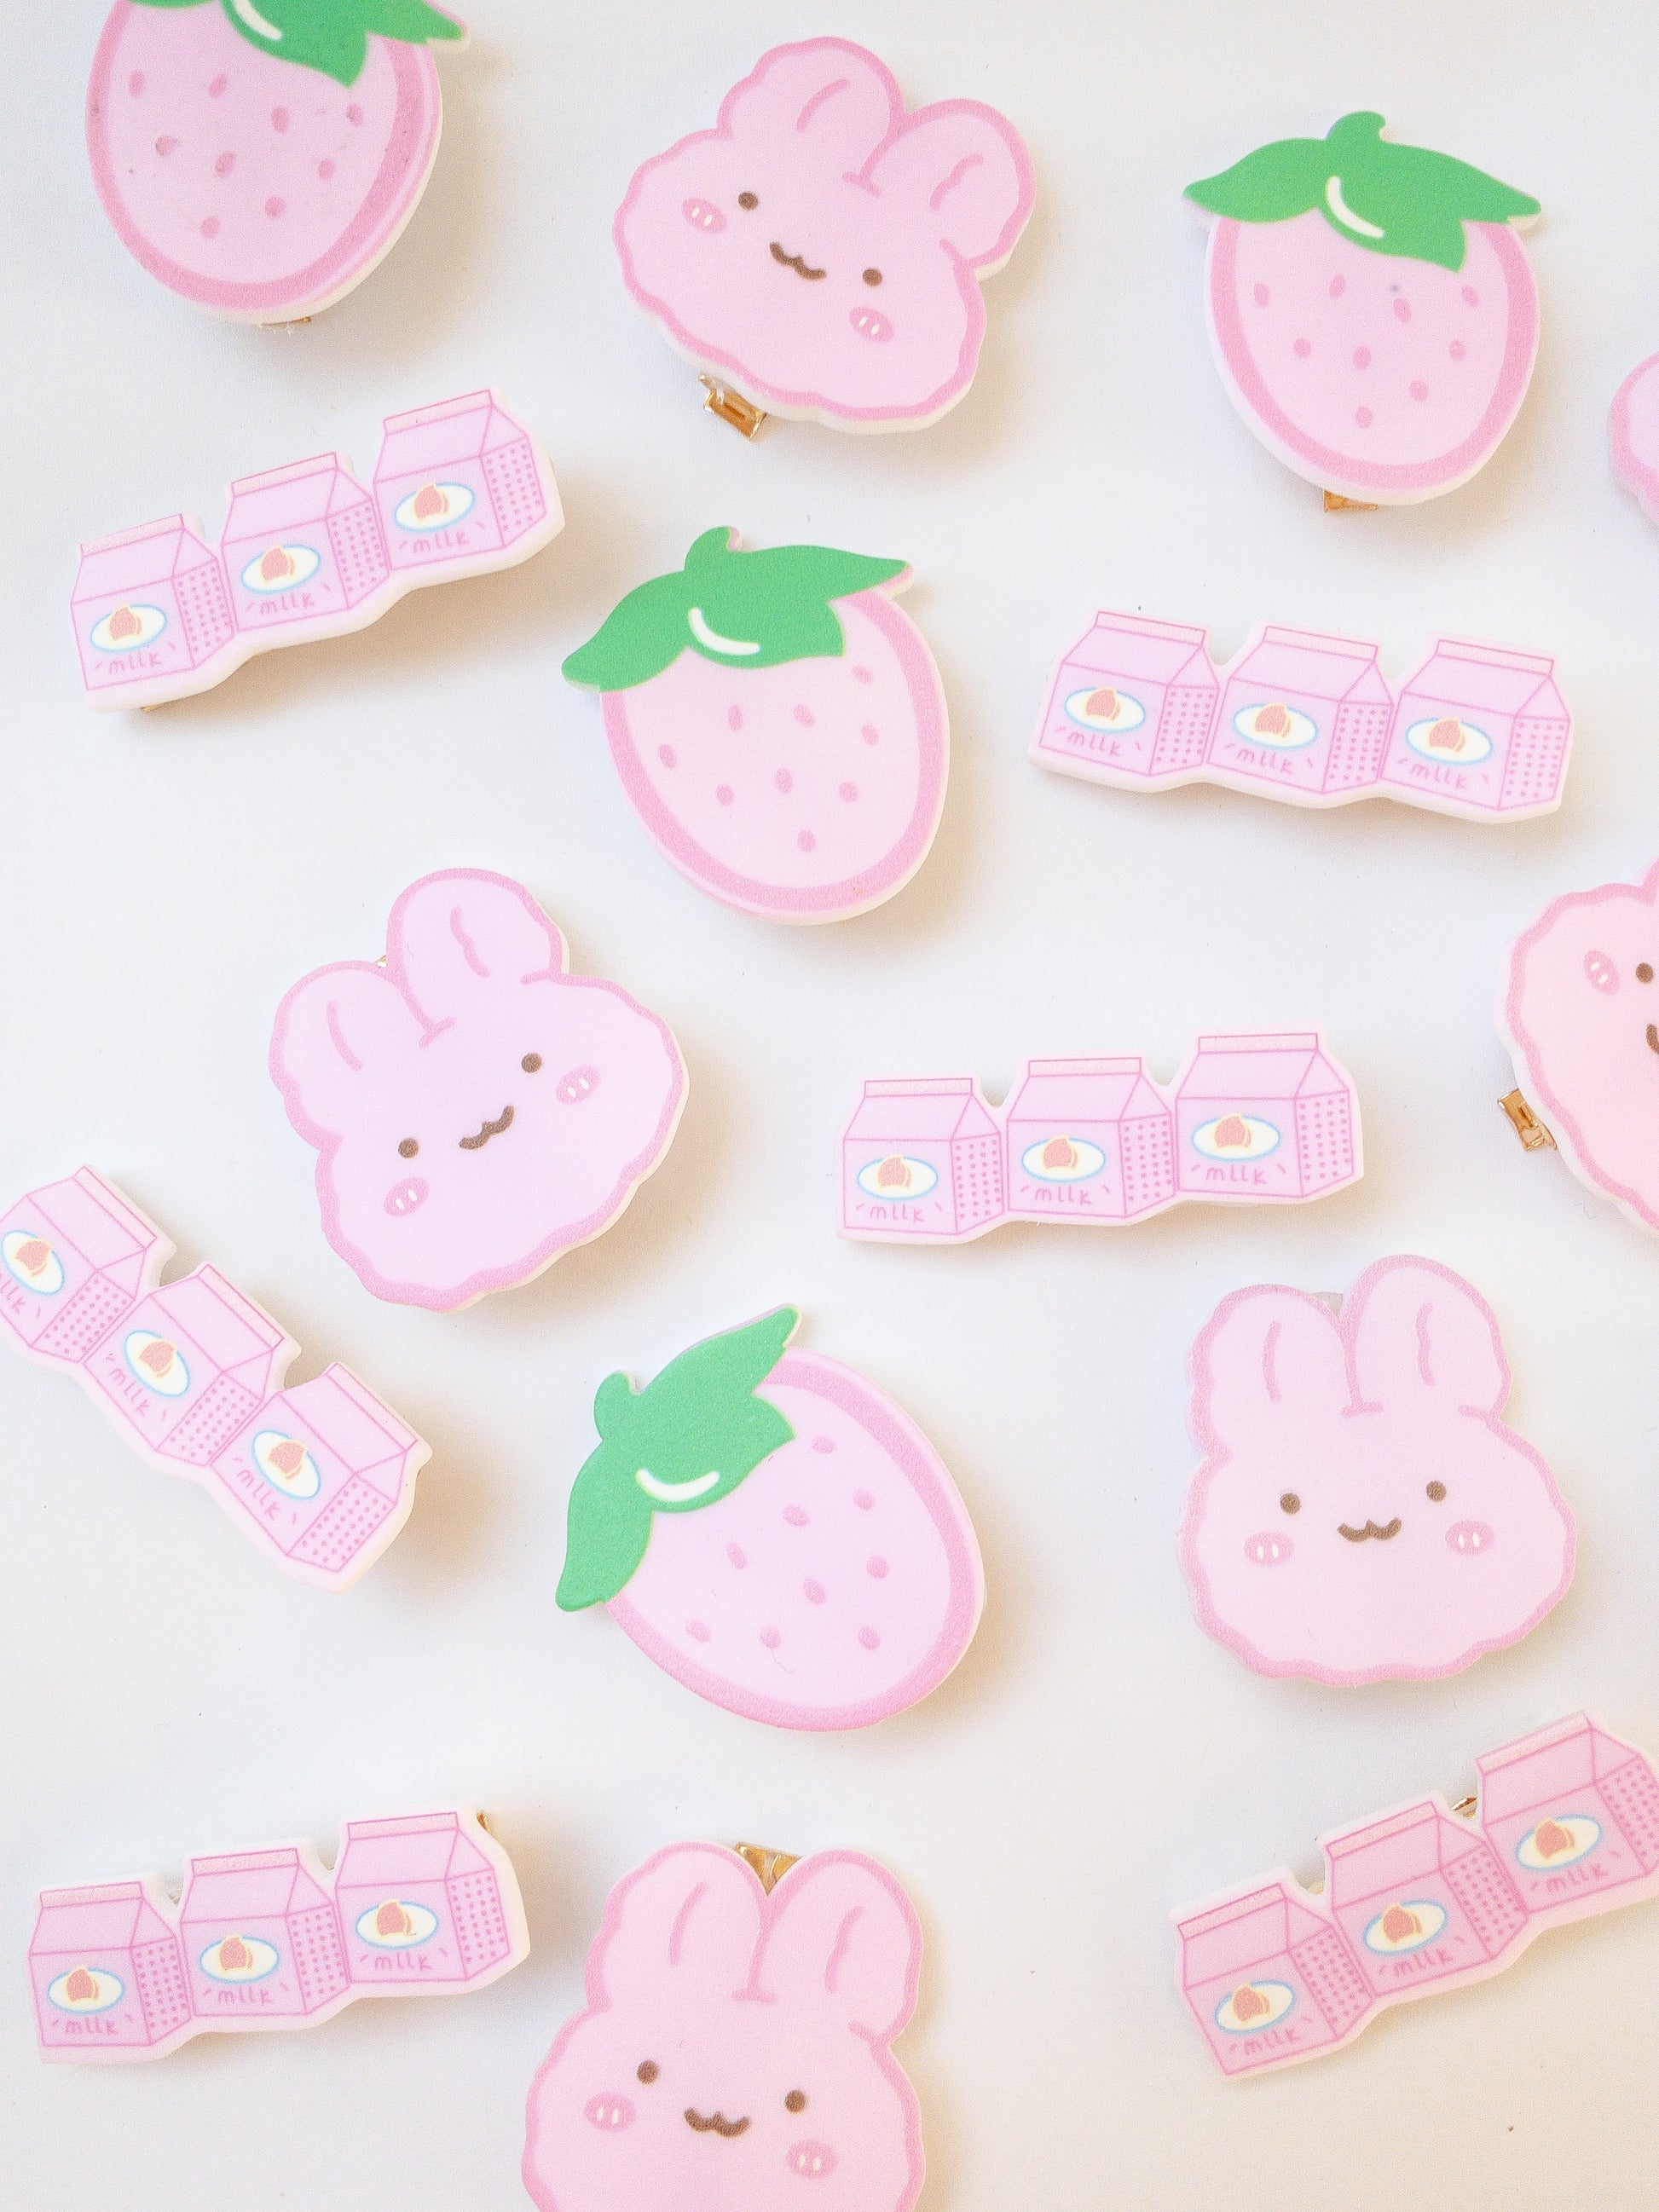 A set of 3 pink hair clips in the sweetest shapes. A pink fluffy cartoon bunny, a big juicy strawberry, and a trio of strawberry milks.  Gold alligator clips